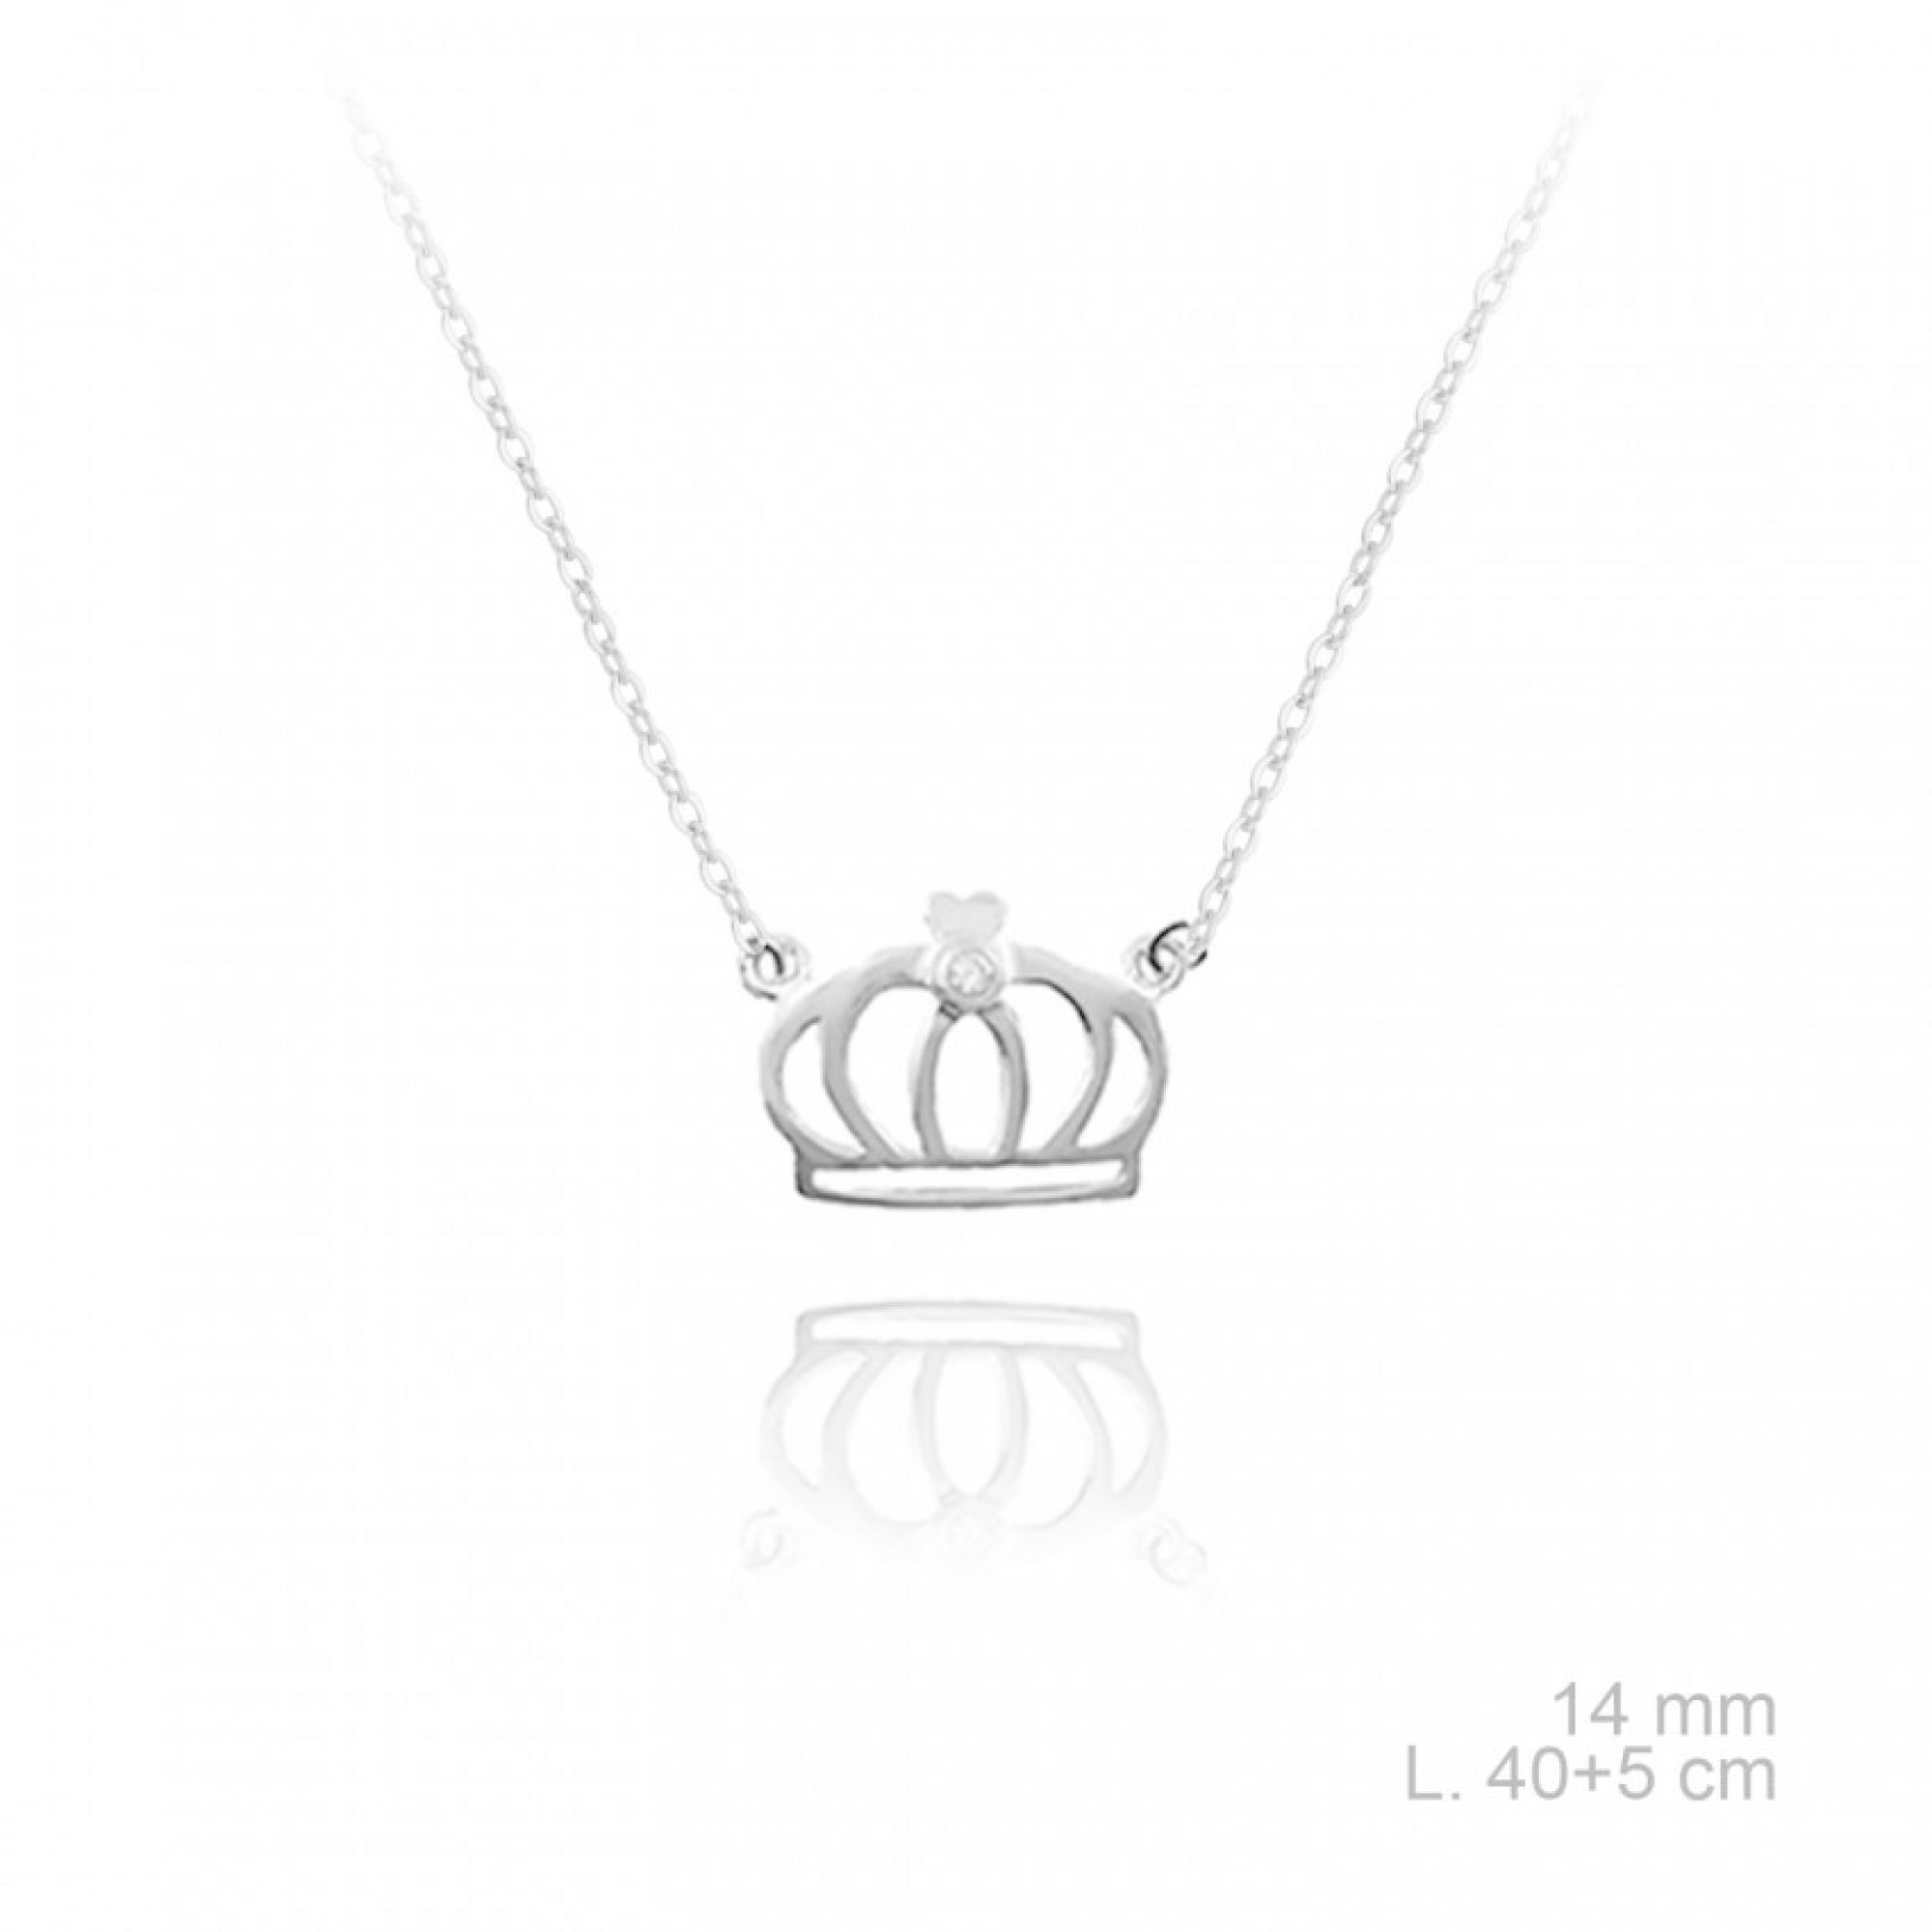 Silver crown necklace with zircon stone